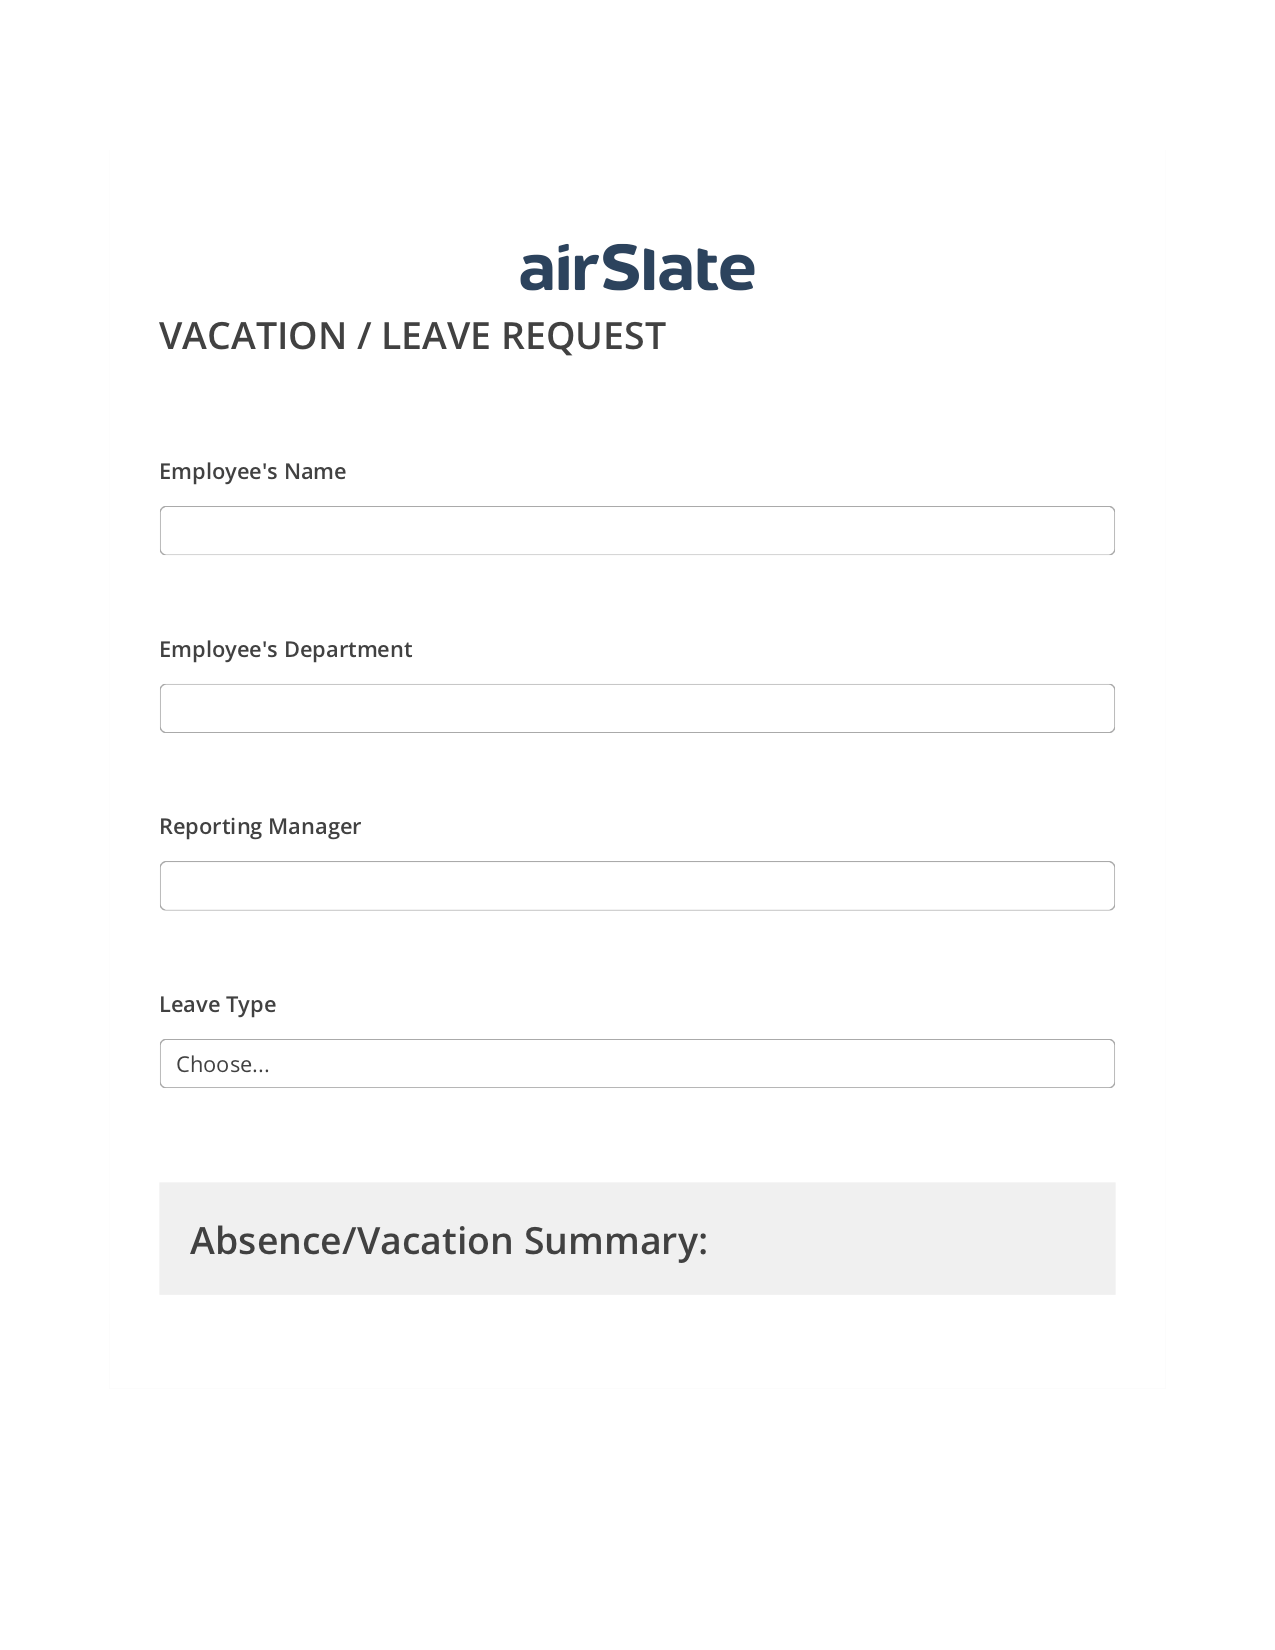 Multirole Vacation/Leave Request Workflow Pre-fill from Office 365 Excel Bot, System Bot - Create a Slate in another Flow, Archive to SharePoint Folder Bot